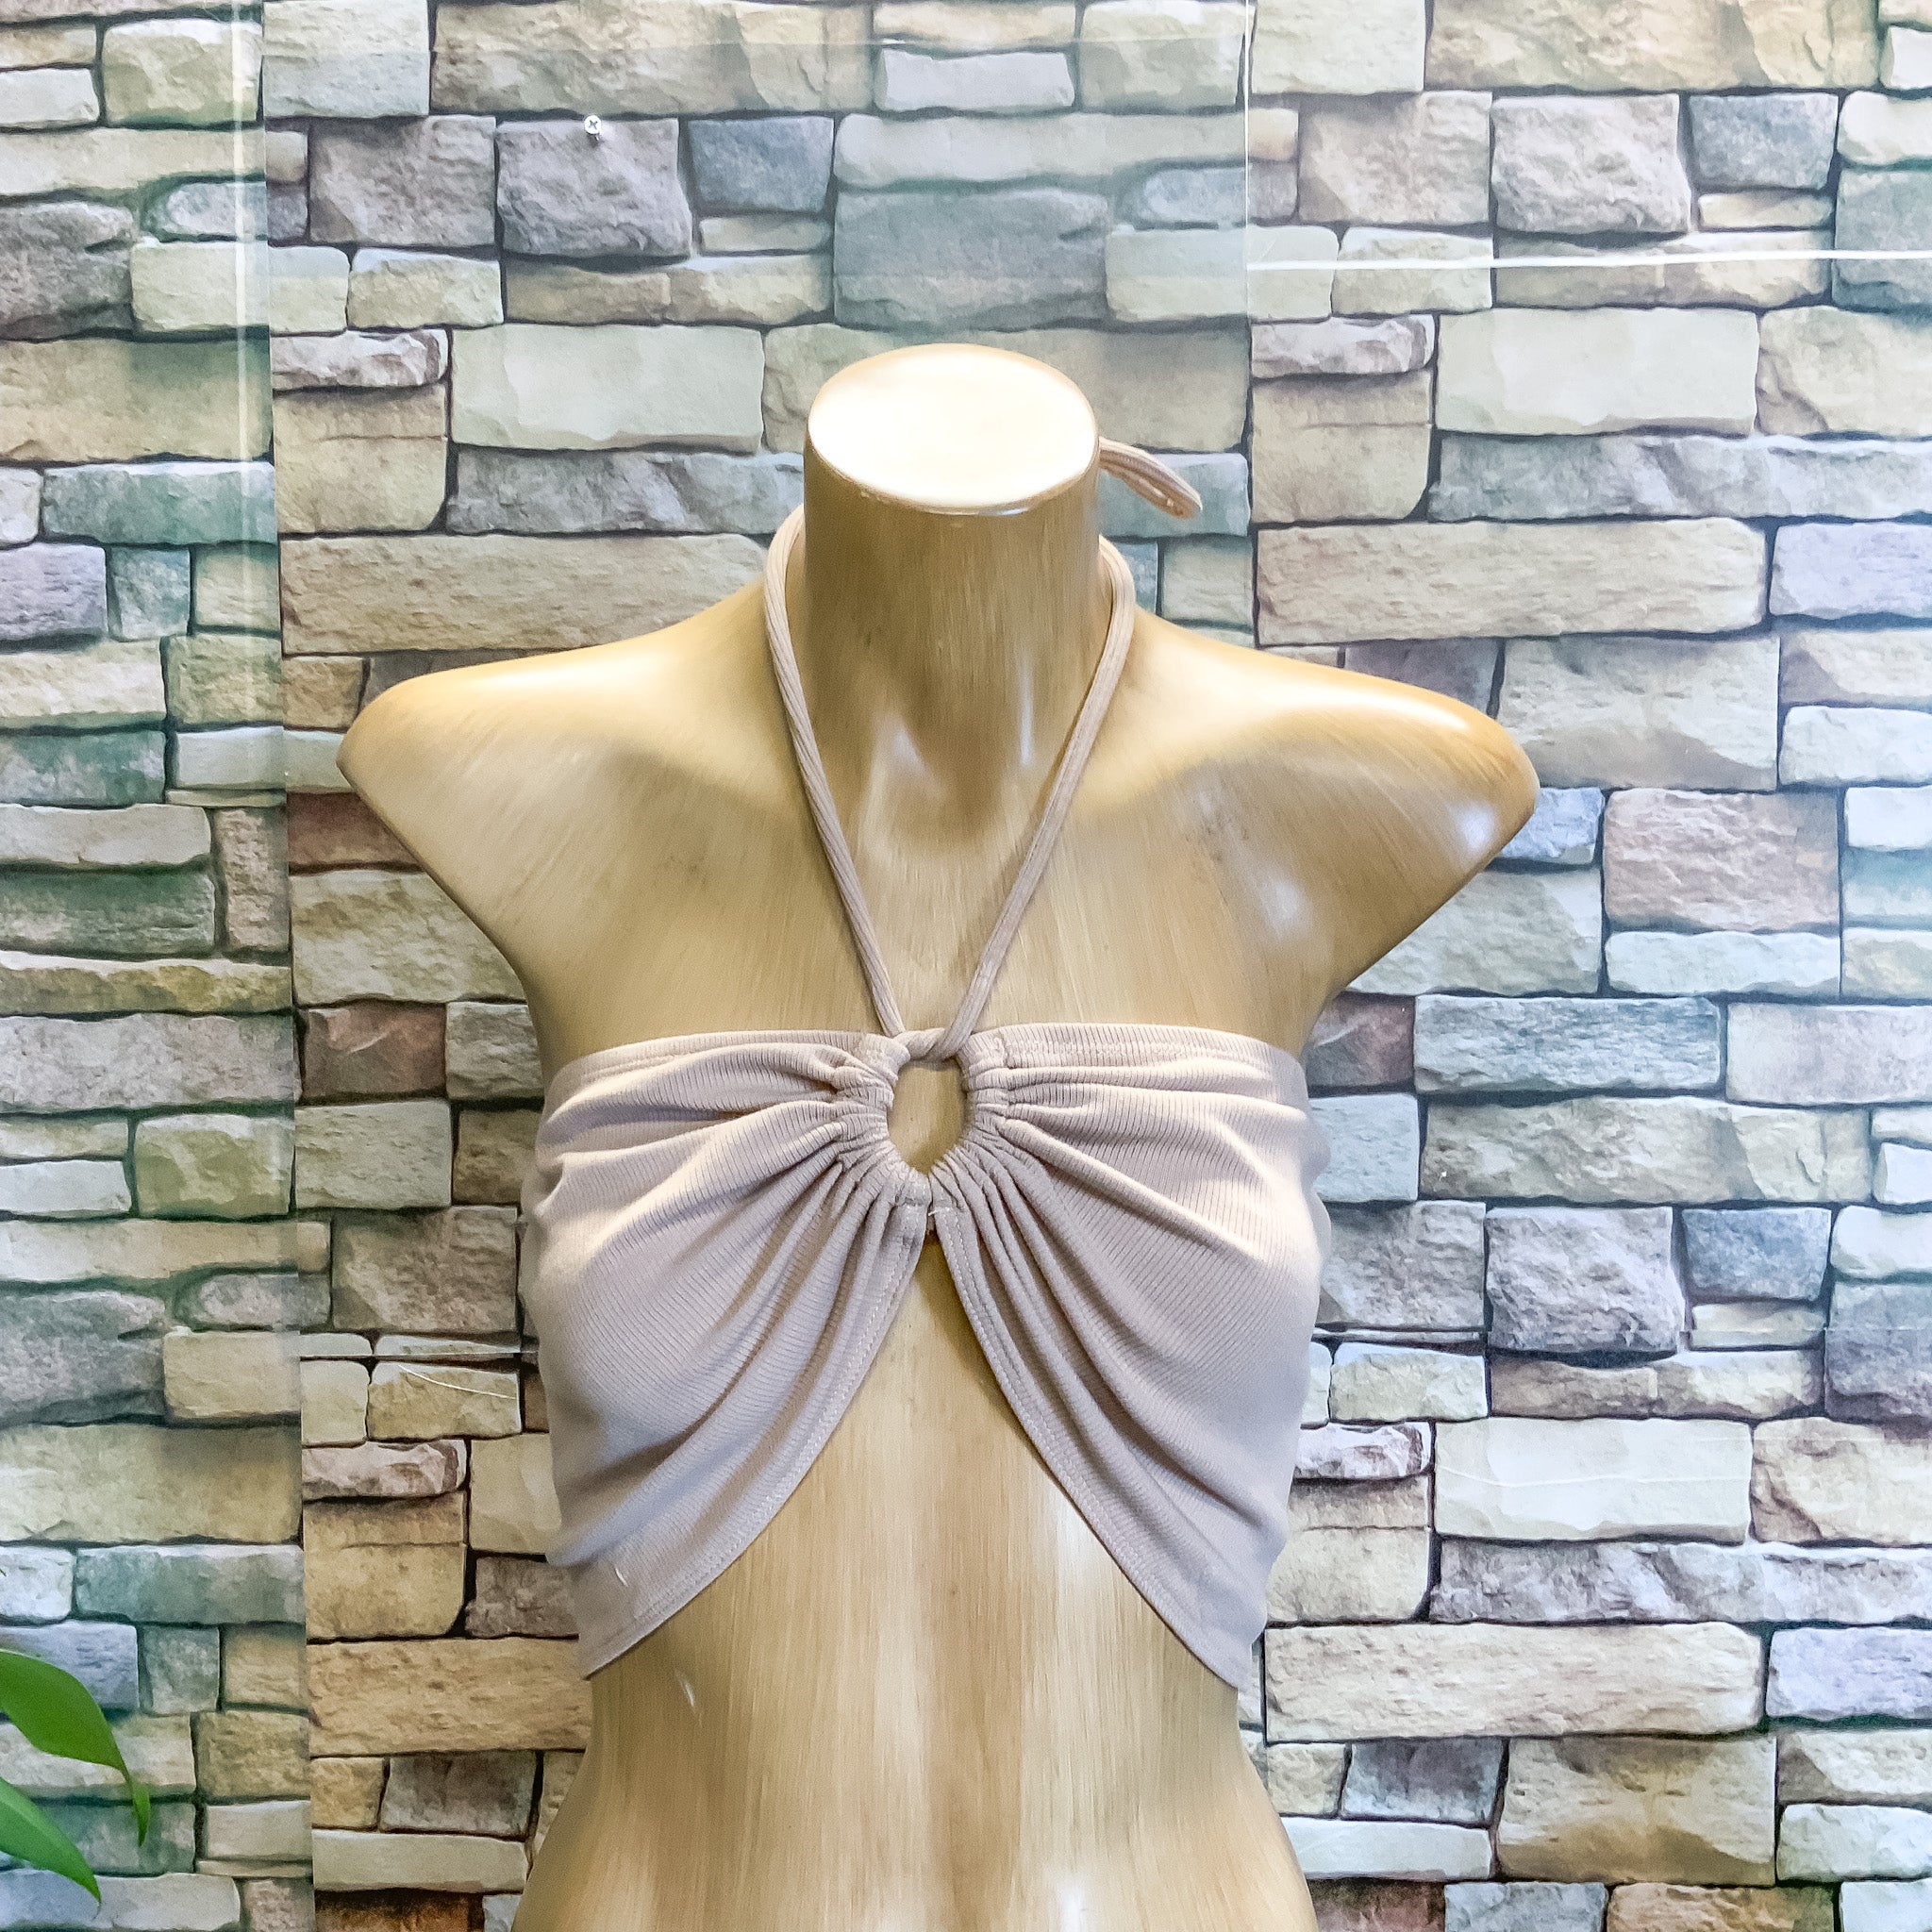 BNWT Princess Polly Latiana Ribbed Crop Top - Beige Size 10